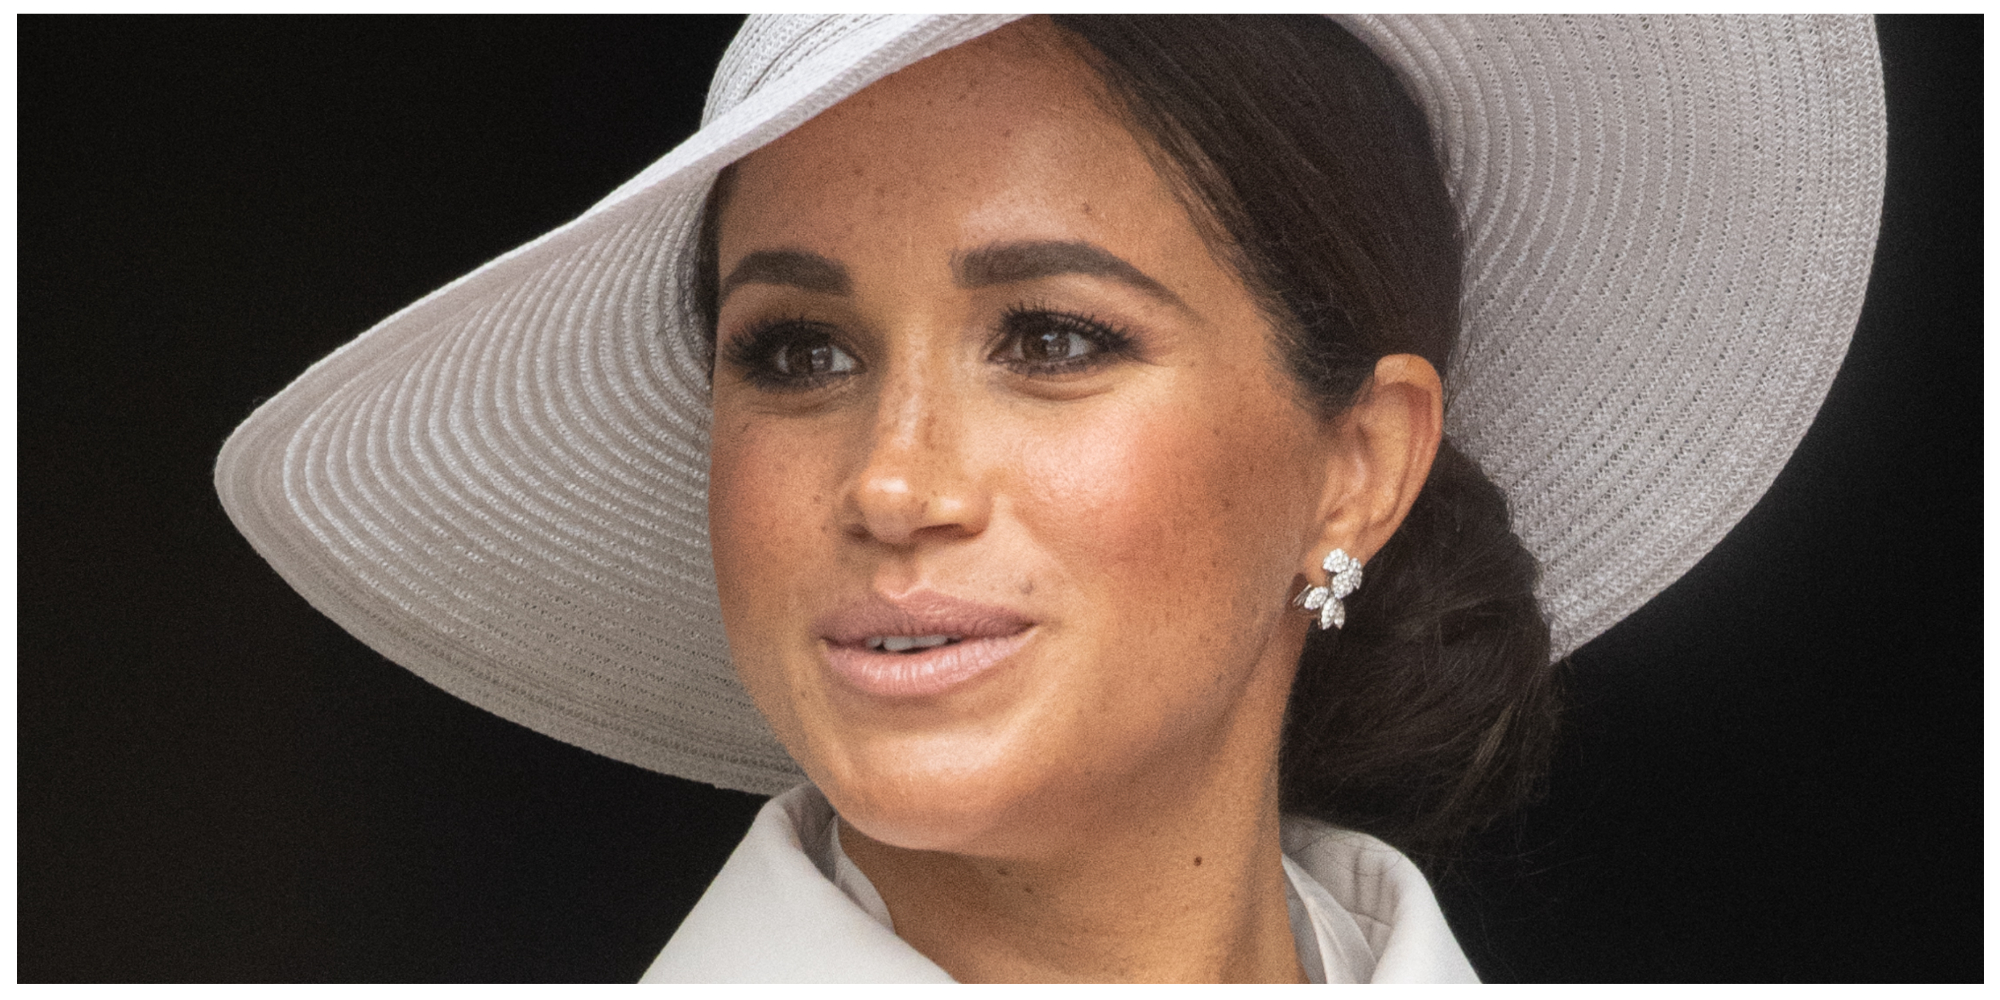 Meghan Markle wears a white hat and suit to a royal event in June 2022.